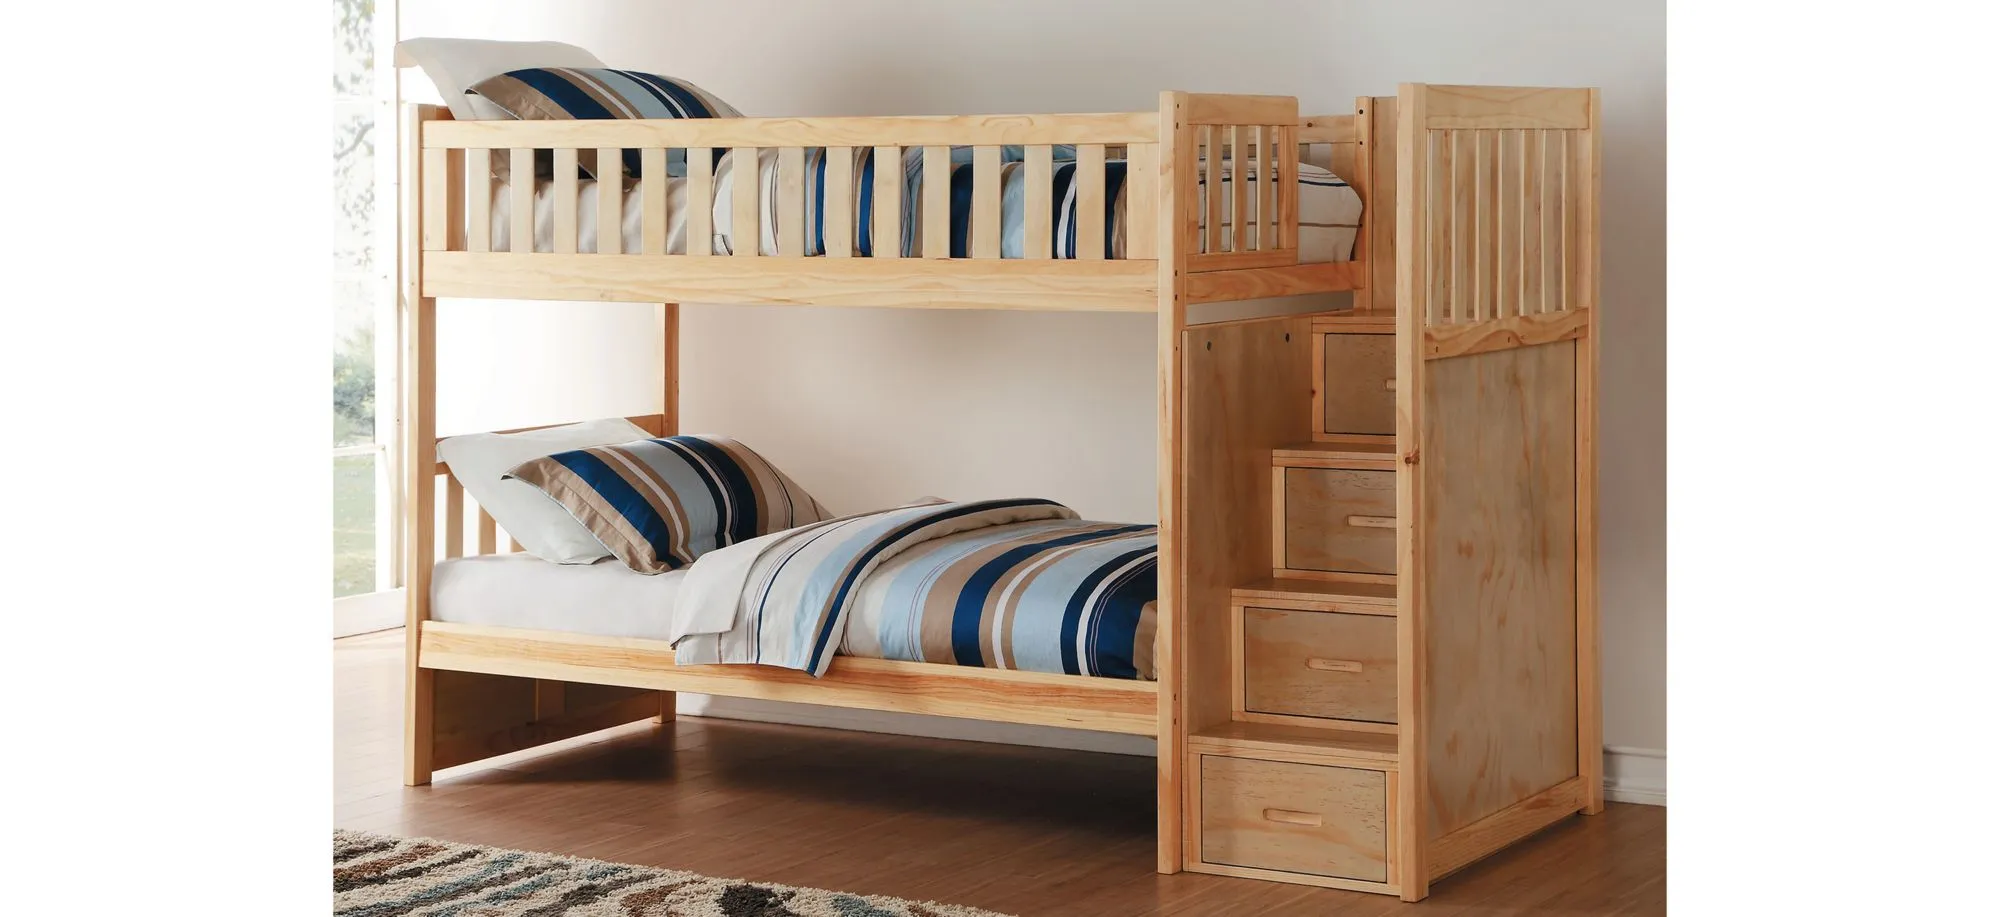 Carissa Bunk Bed with Storage Staircase in Natural by Homelegance